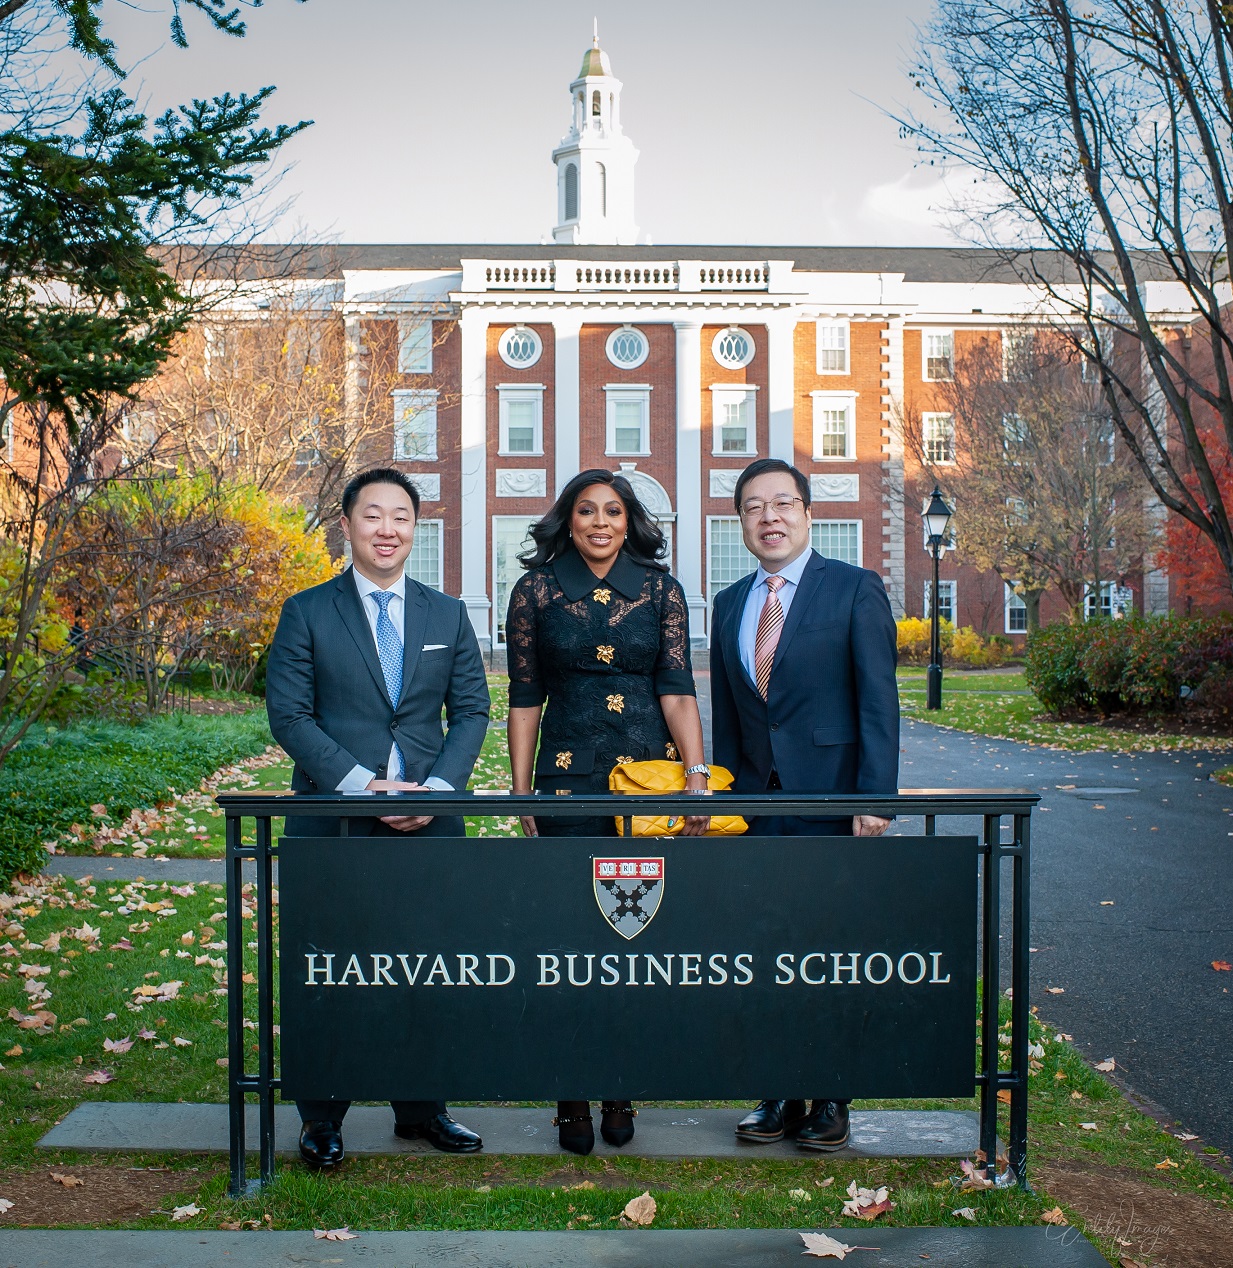 L-R: Andy Wu, Assistant Professor of Business Administration at Harvard Business School; Mo Abudu, CEO of EbonyLife Group; and Feng Zhu, Professor of Business Administration at Harvard Business School, at the official launch of a written case study on EbonyLife Media at the Harvard Business School, yesterday.